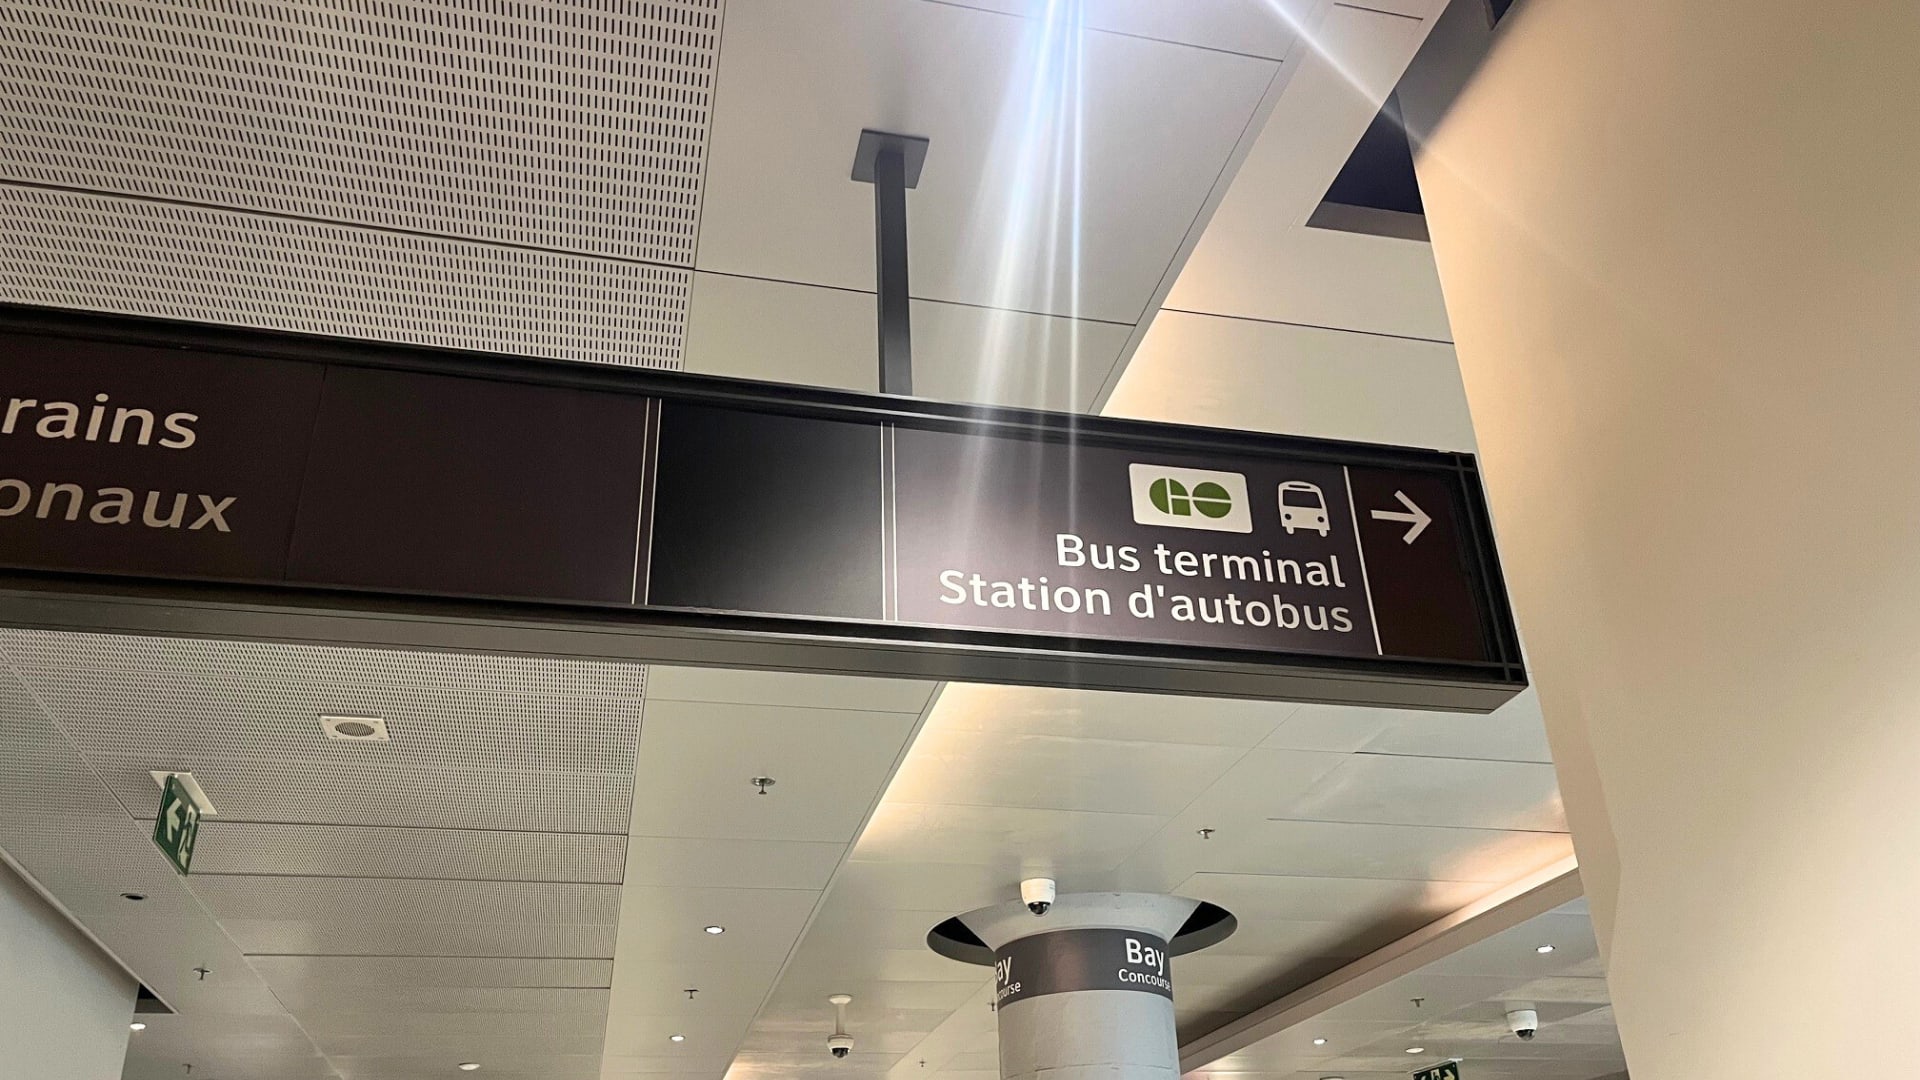 Sign labelled "Union Station Bus Terminal" in the Bay Concourse